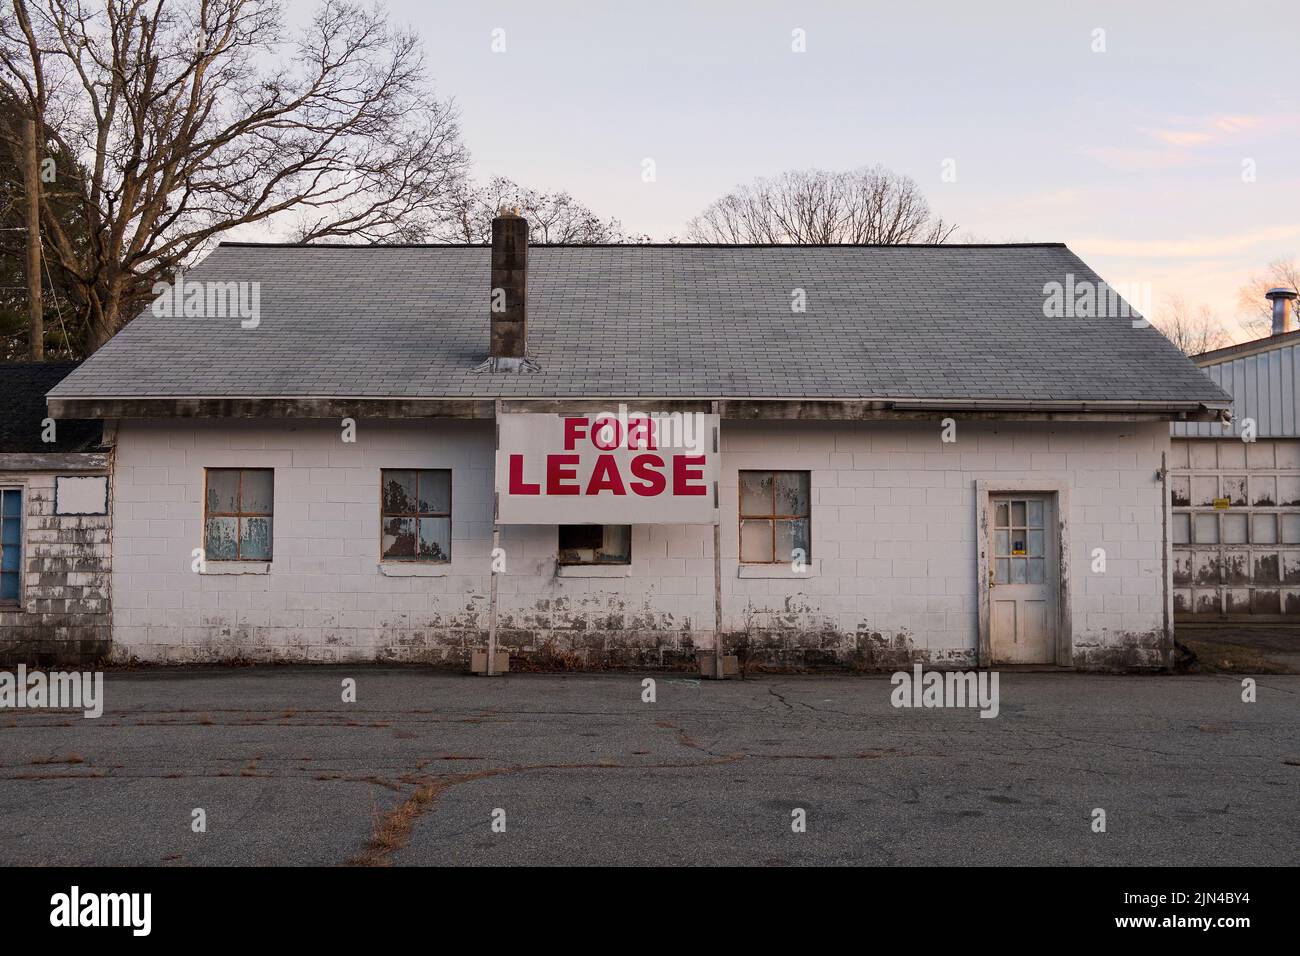 Dilapidated Cinder Block Building with For Lease Sign Stock Photo